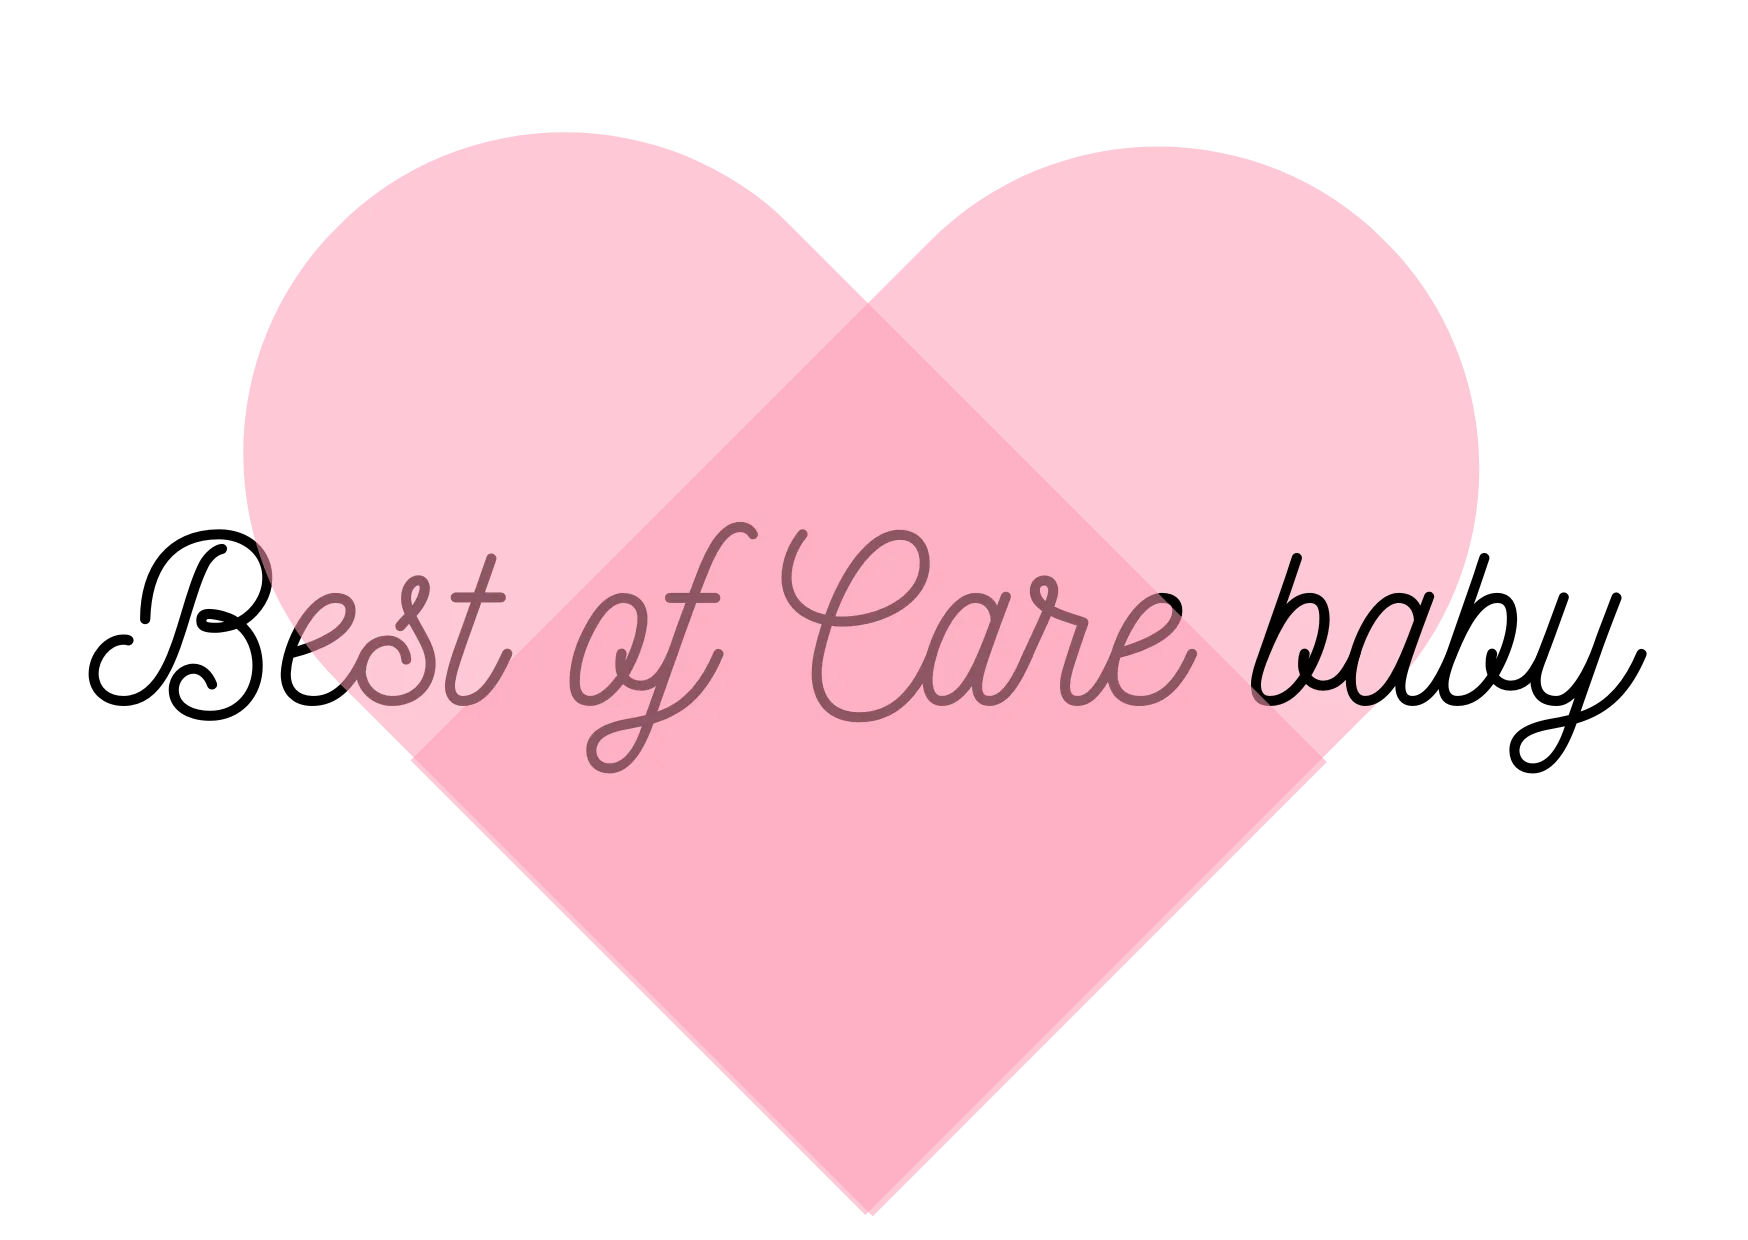 Best Of Care Baby